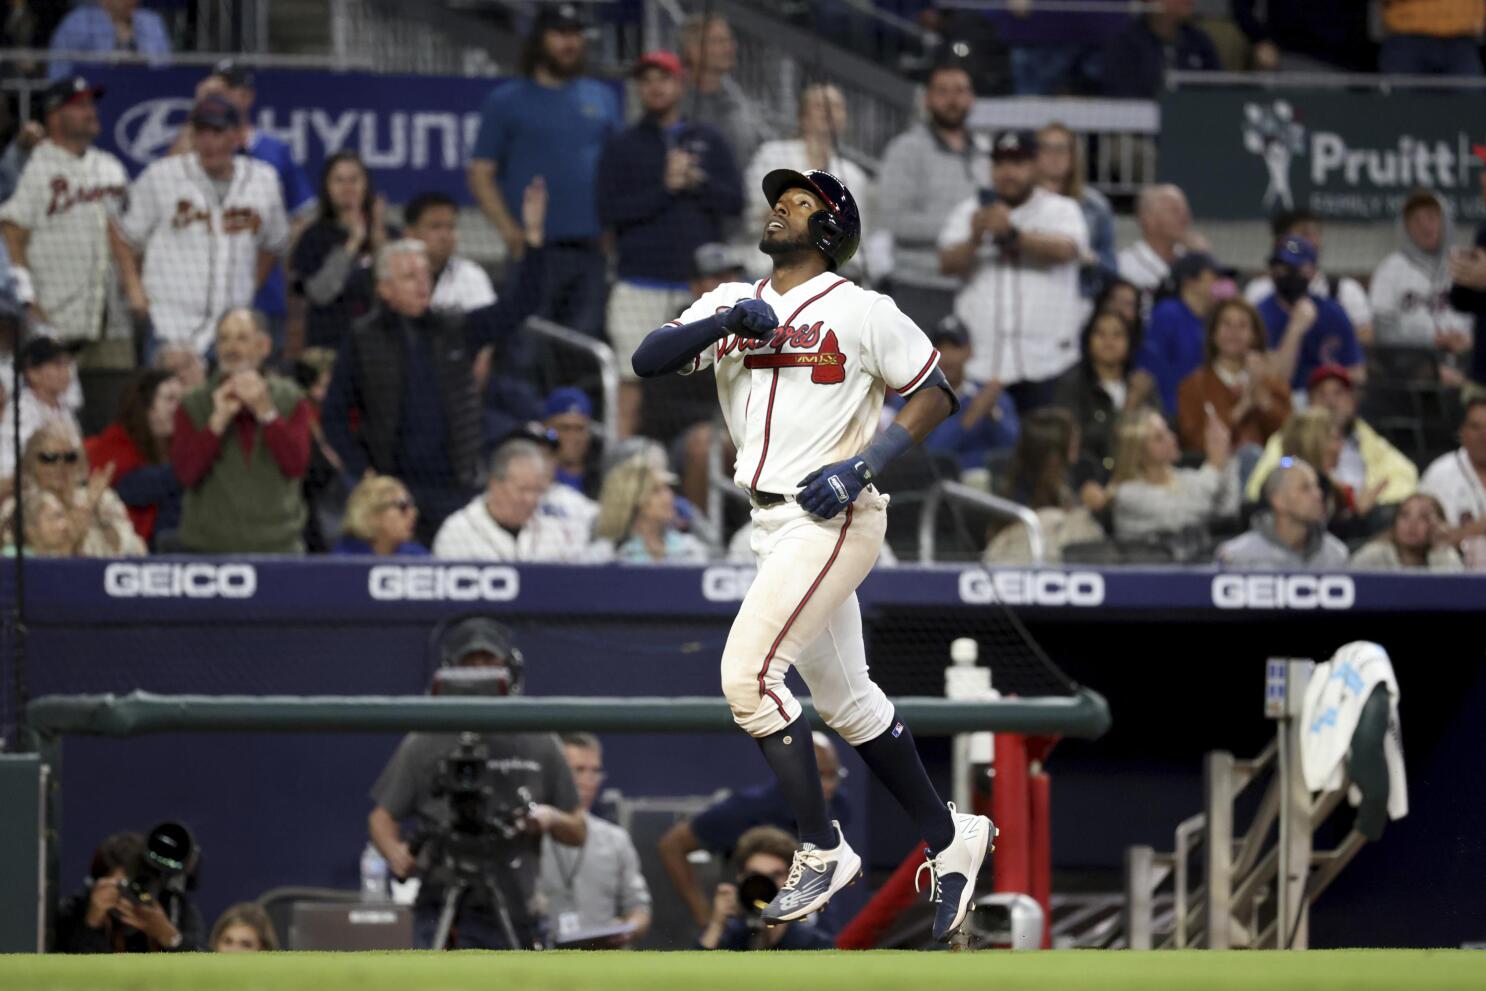 Demeritte, Fried lead Braves to needed win, 3-1 over Cubs